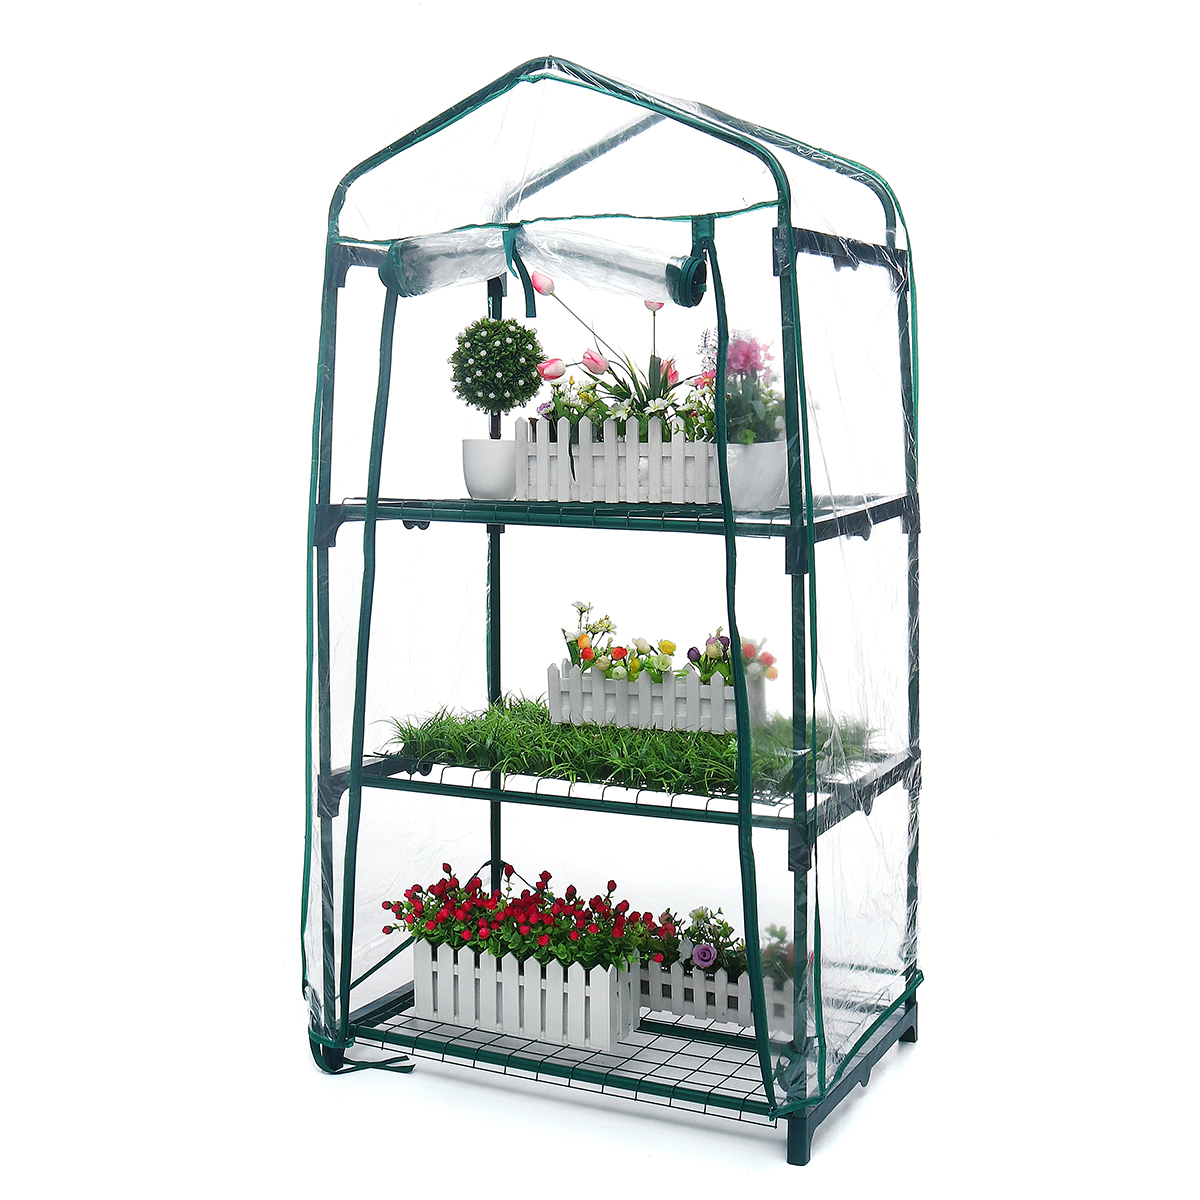 Mini-Greenhouse-AUEDW-3-Shelves-IndoorOutdoor-Greenhouse-with-Zippered-Cover-and-Metal-Shelves-for-G-1592630-6